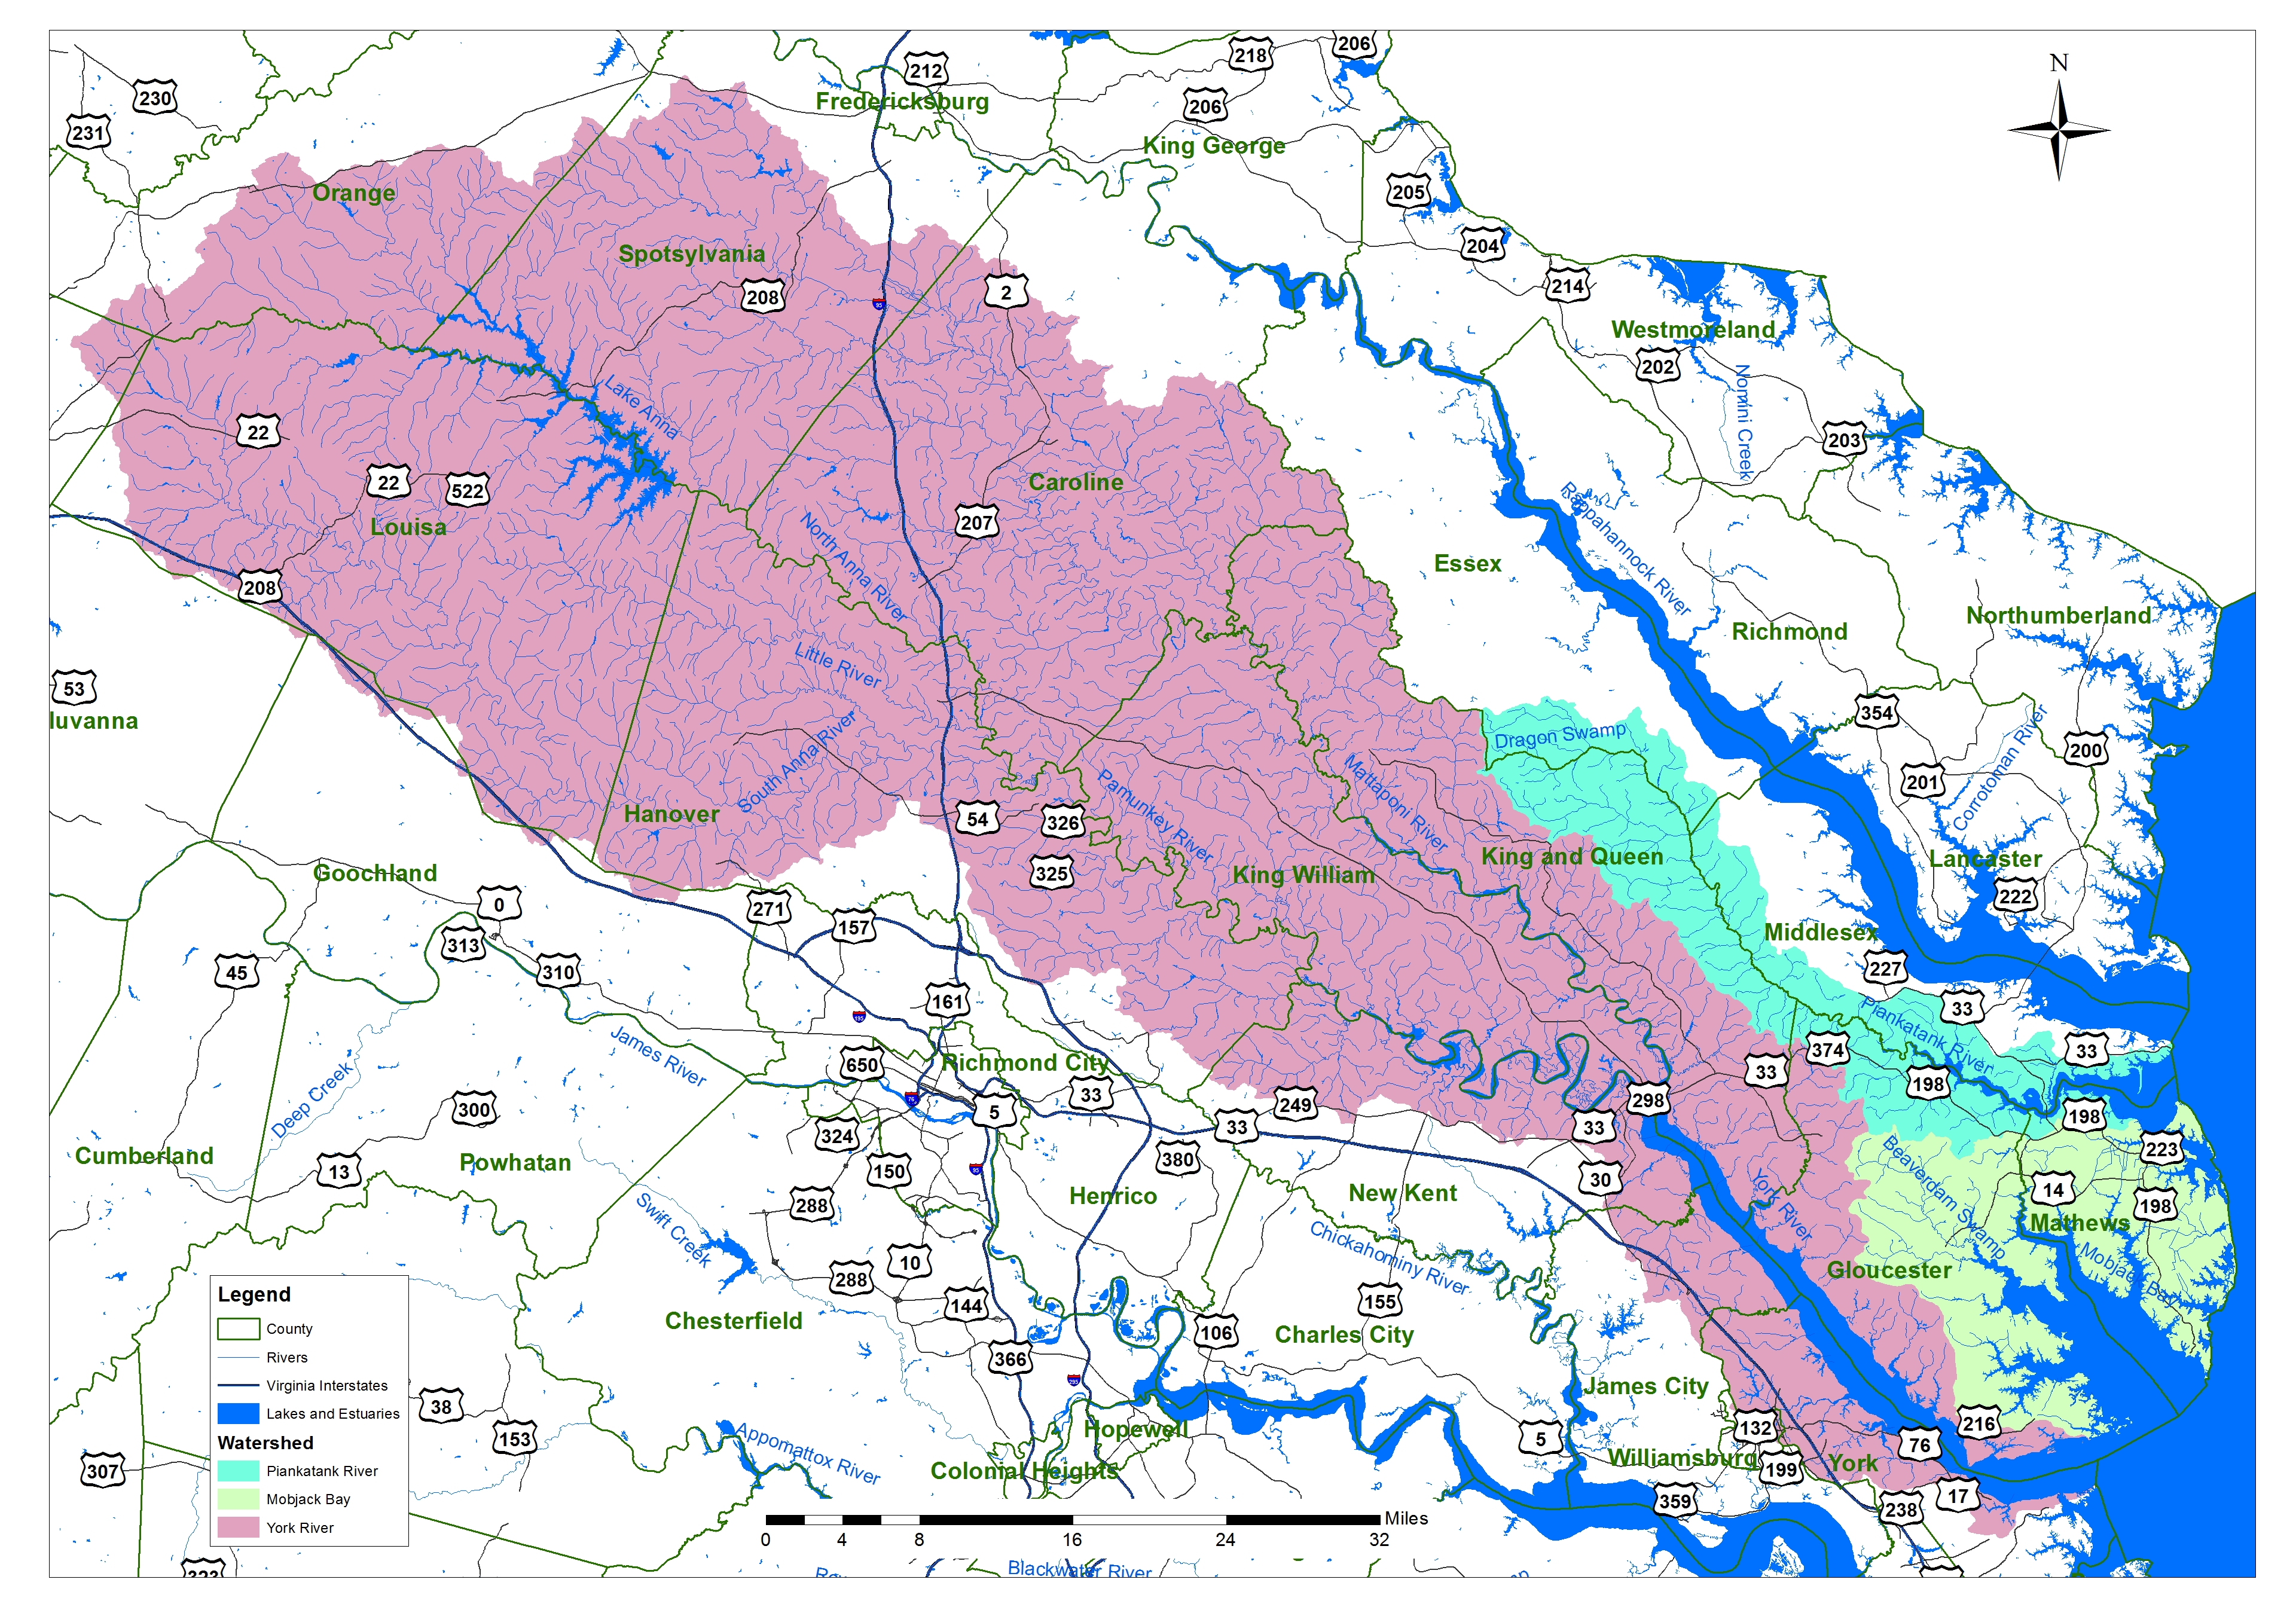 Click image to enlarge watershed map.